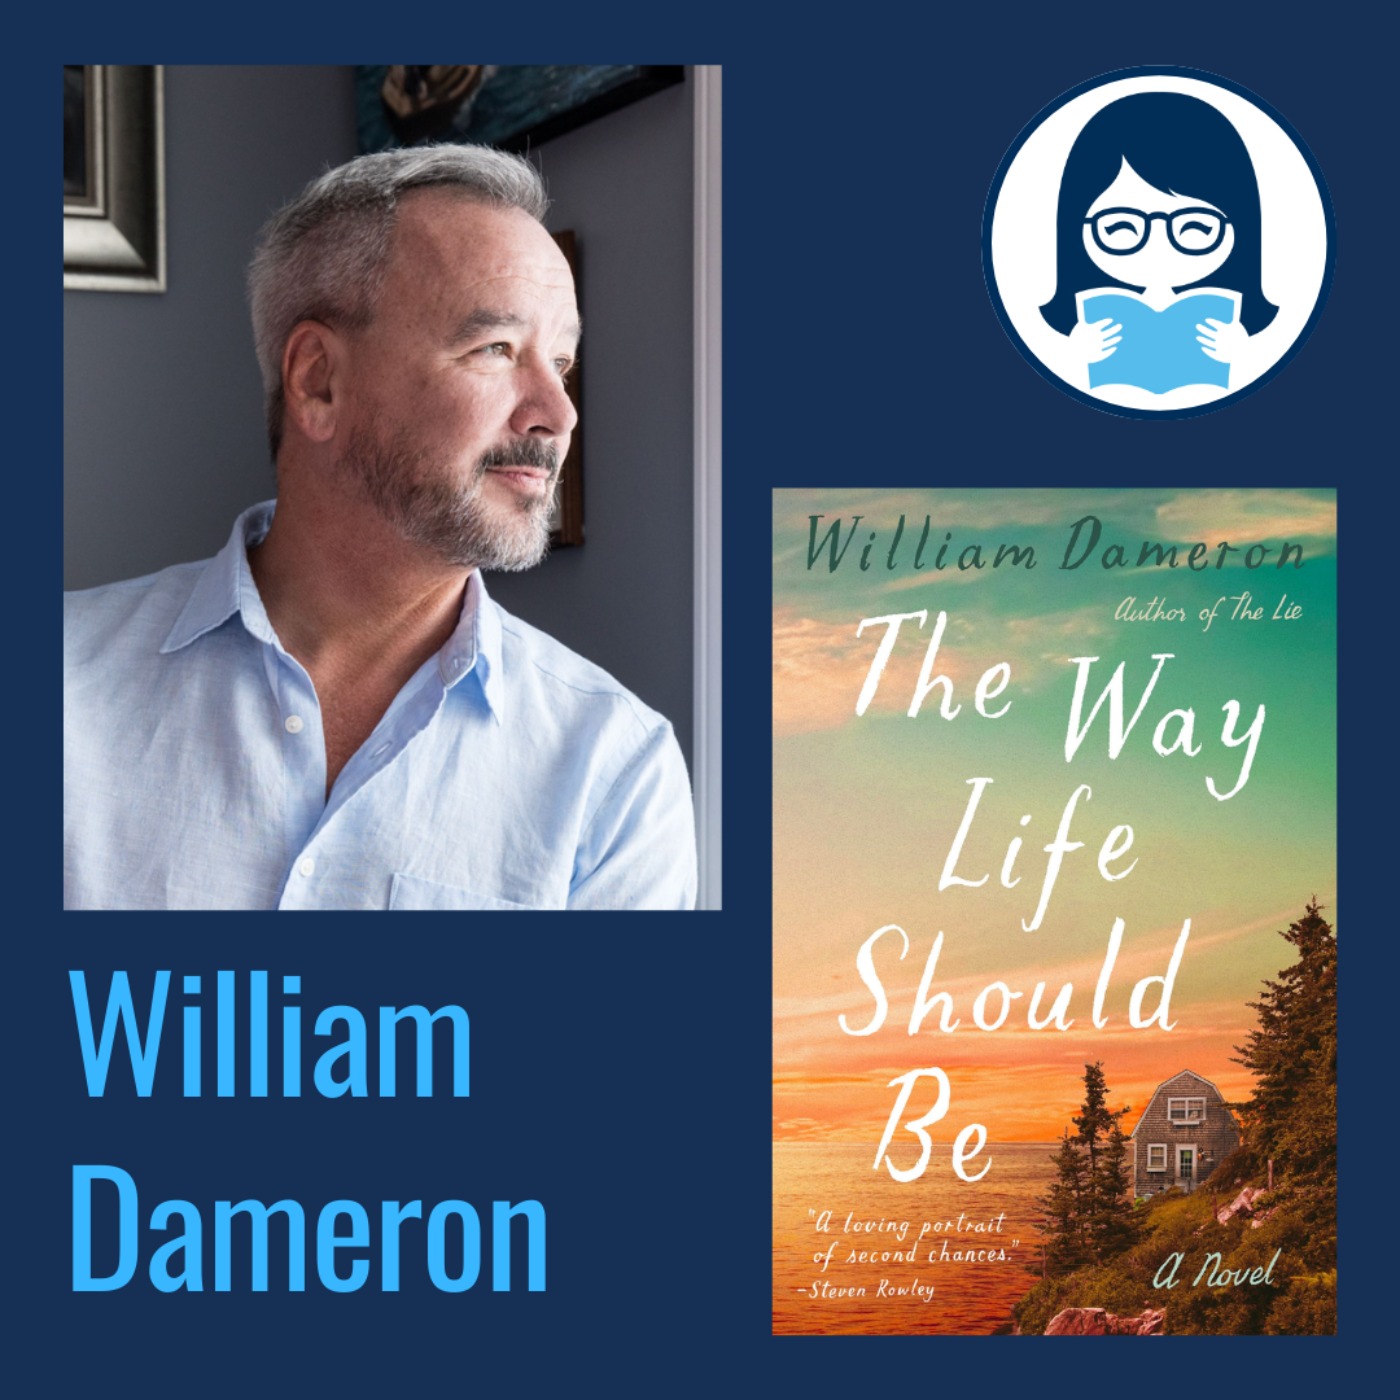 William Dameron, THE WAY LIFE SHOULD BE